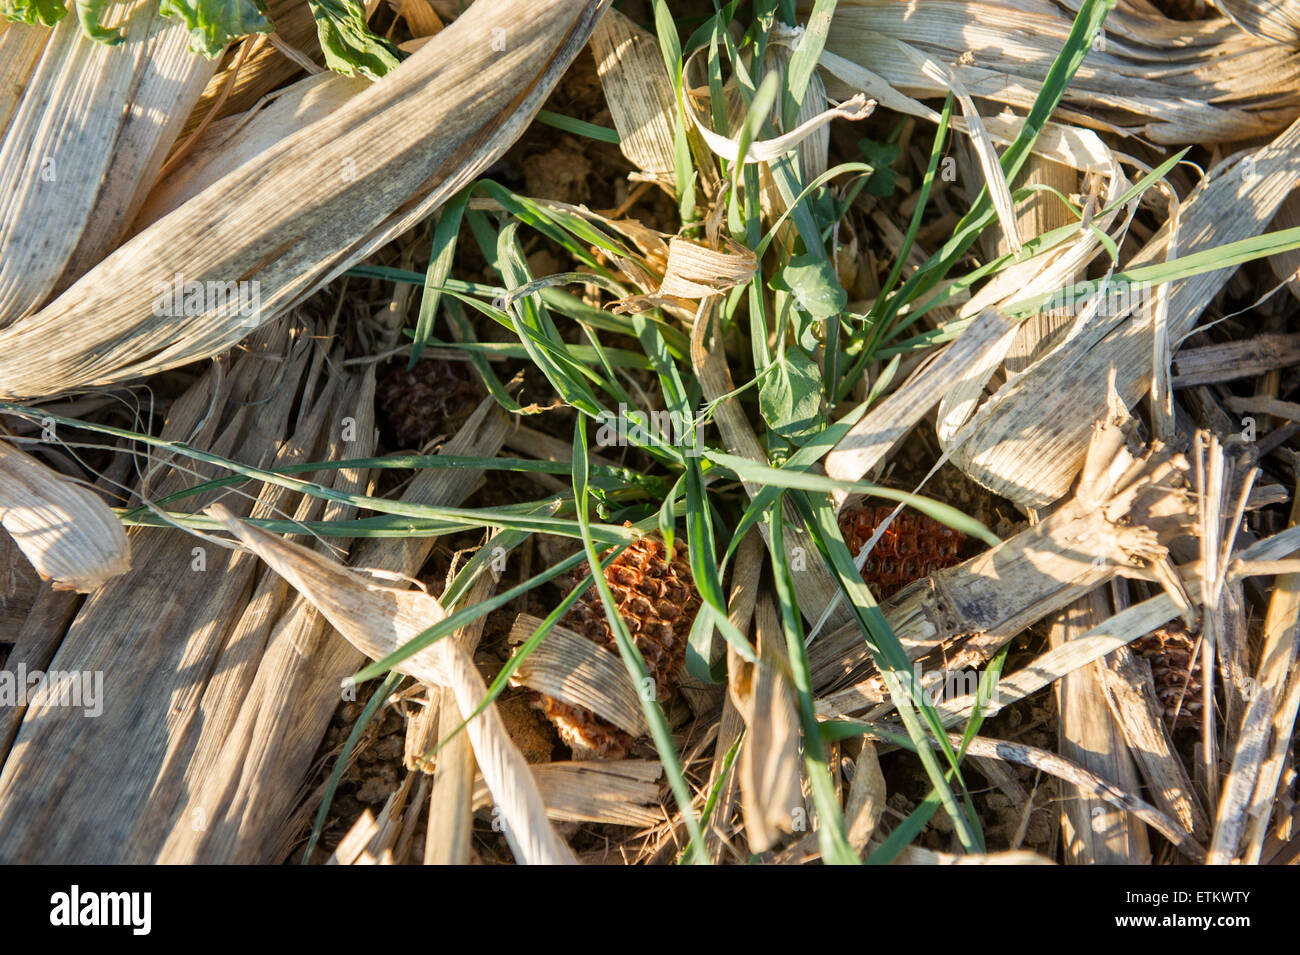 Grass growing between dried up corn husks in Holtwood, Pennsylania, USA Stock Photo